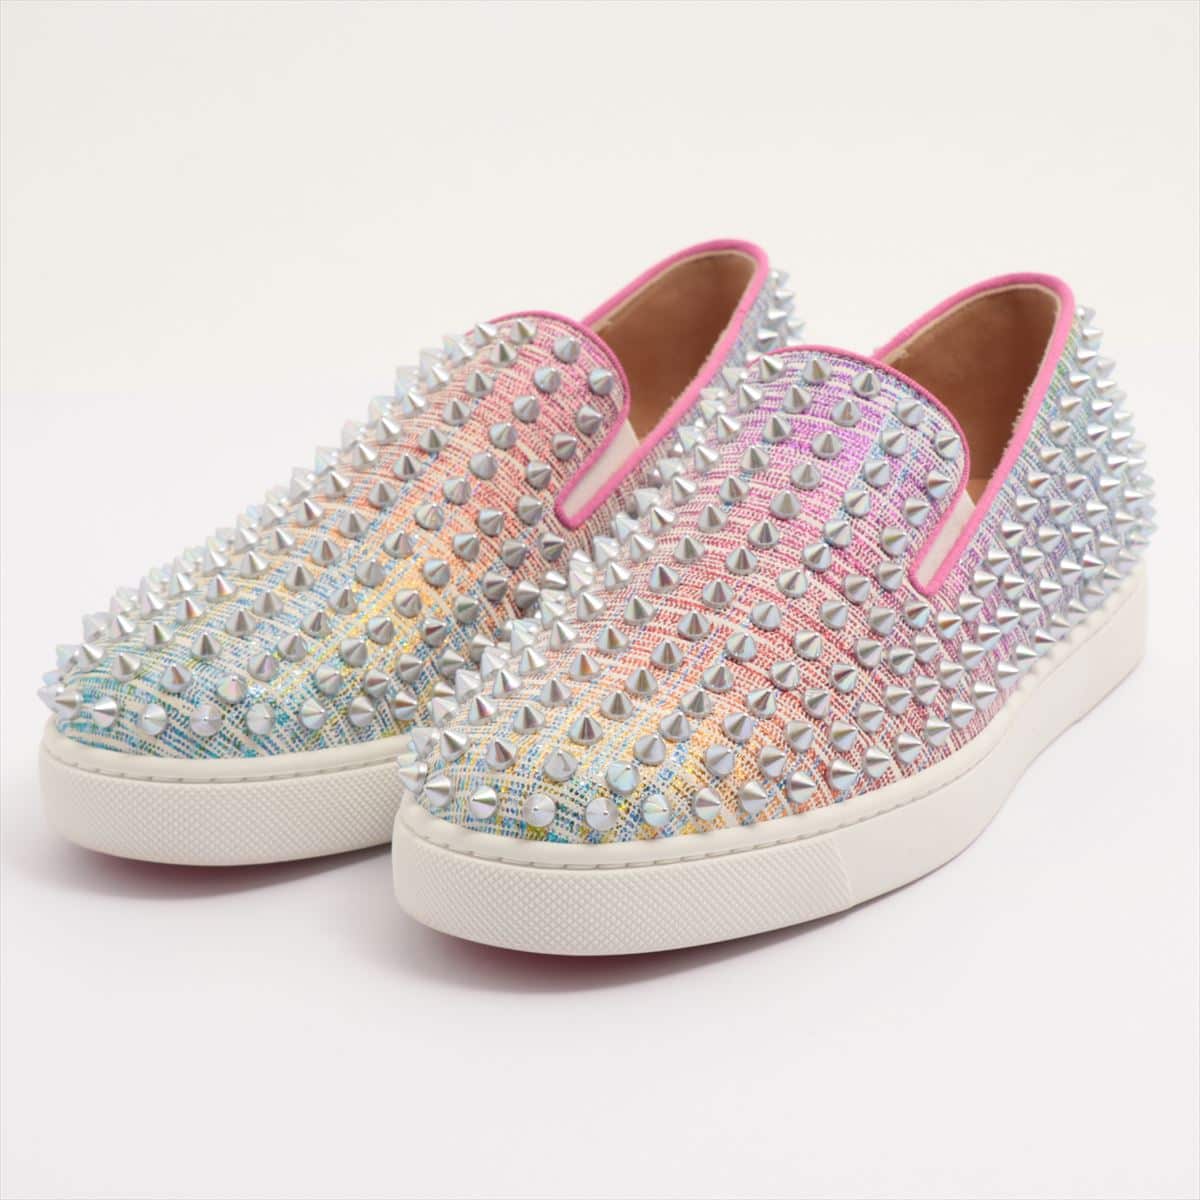 Christian Louboutin roller boat Leather Slip-on 38 Ladies' Multicolor Spike Studs